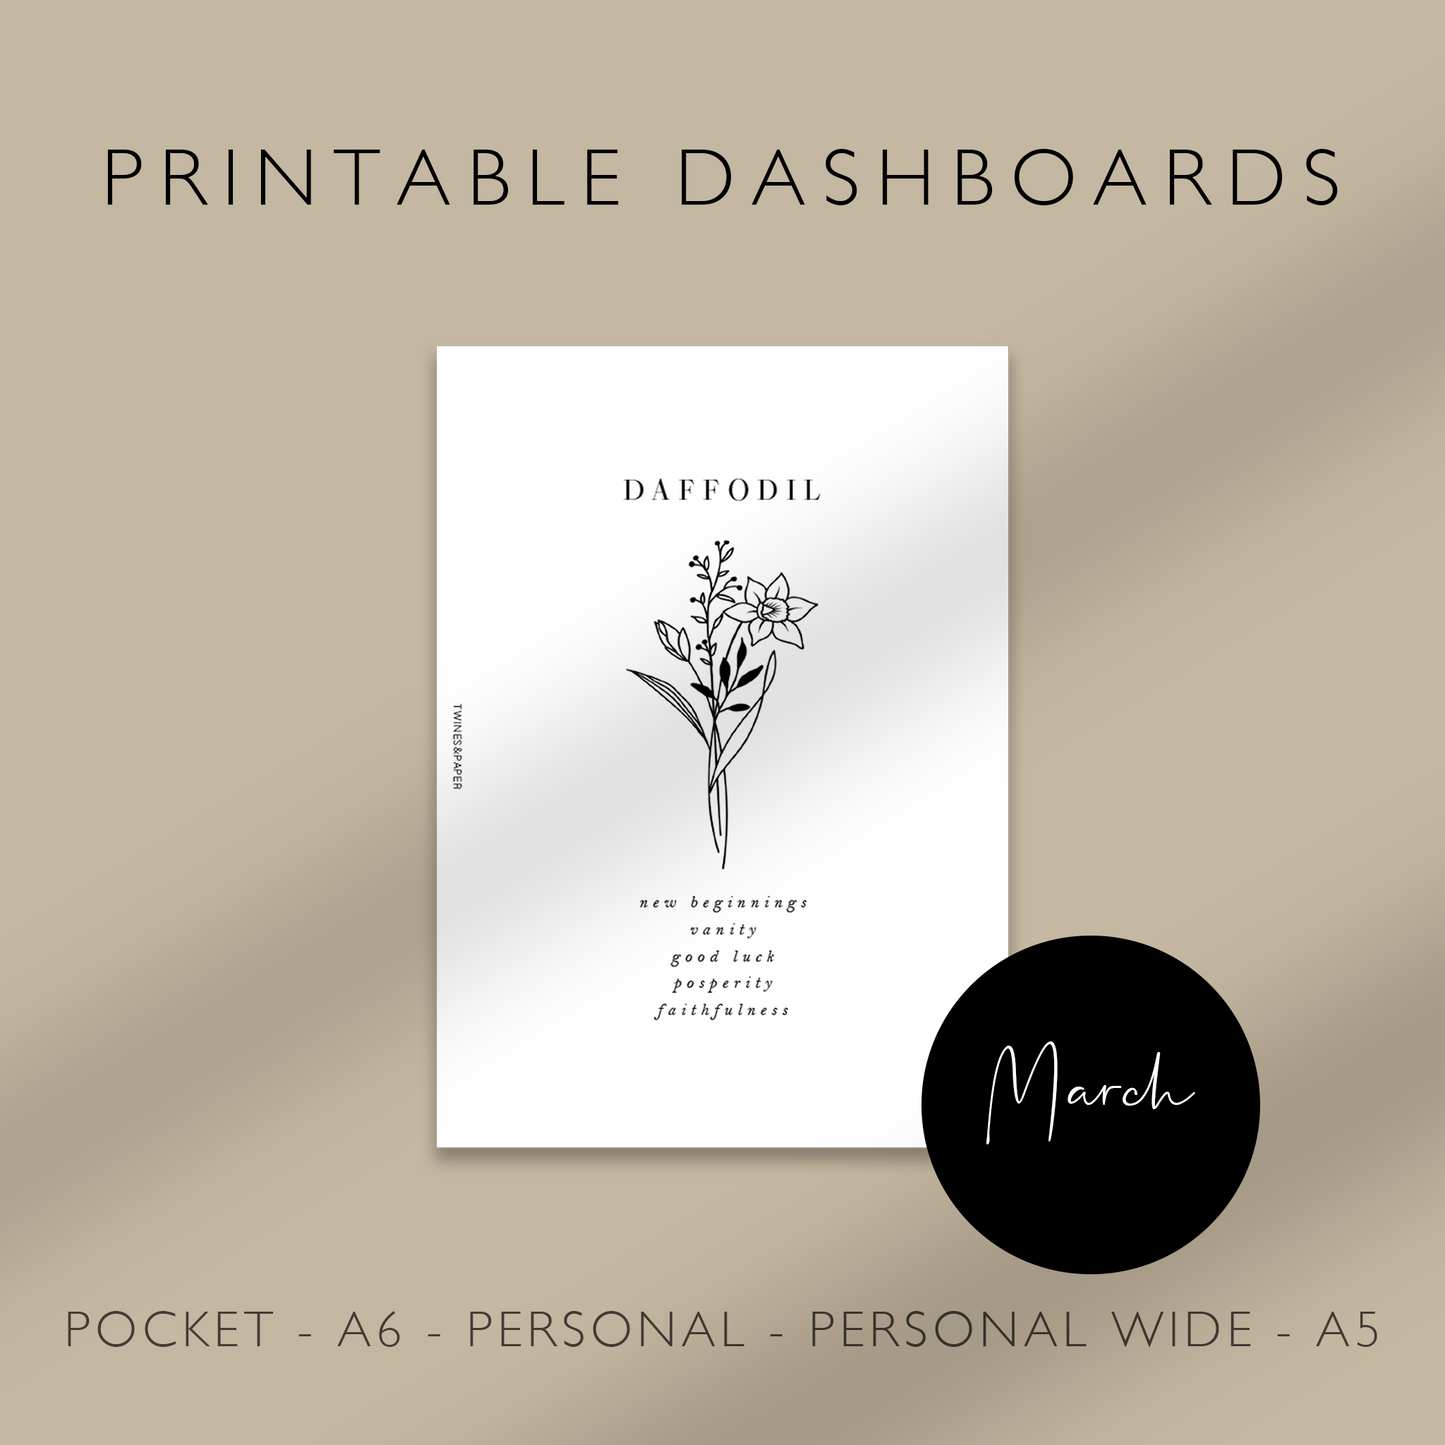 "Daffodil - March" Birth Month Flowers - Printable Dashboards